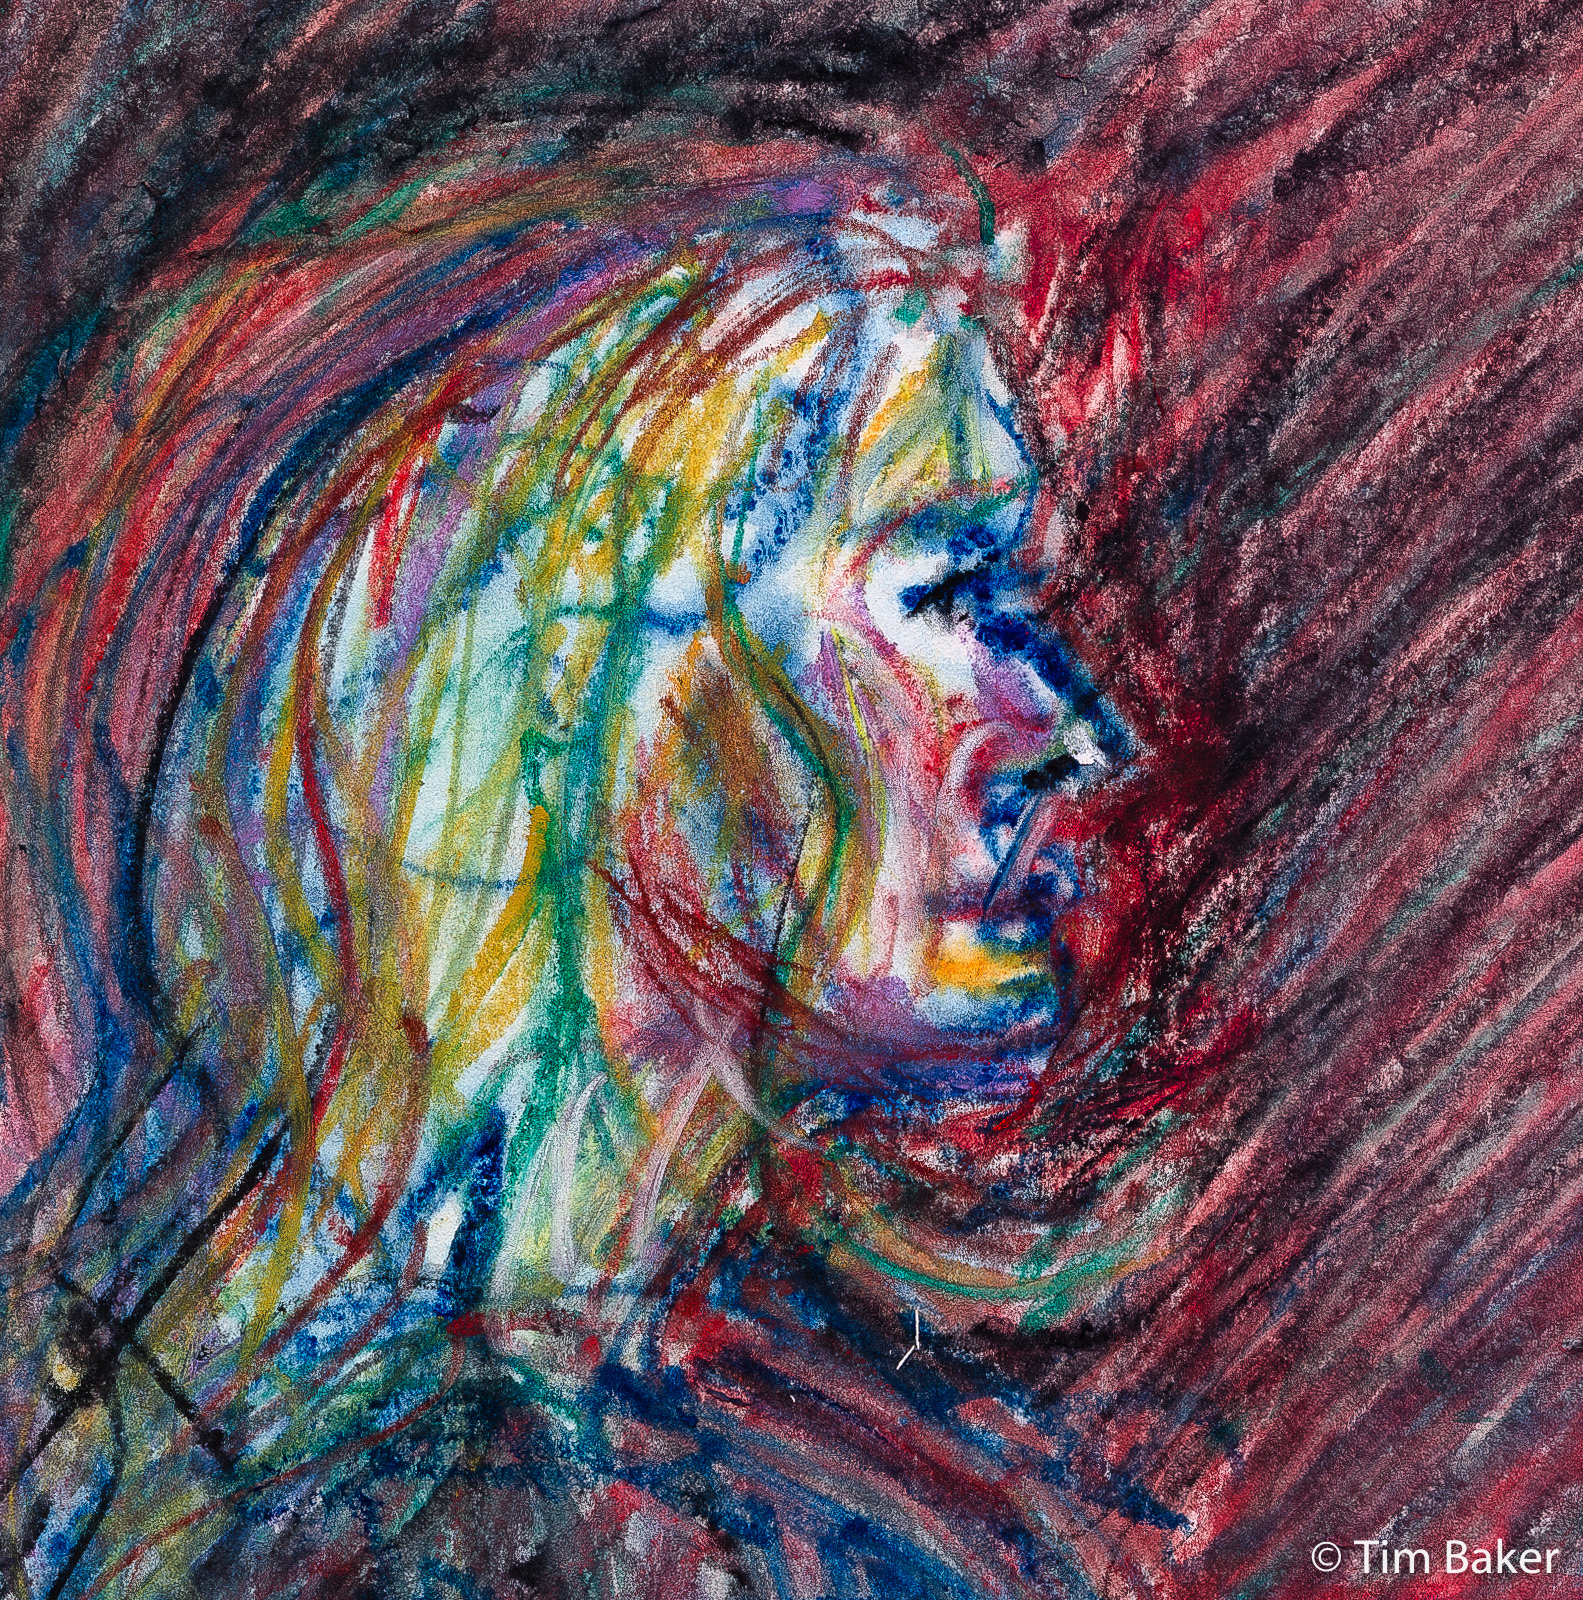 Starry Night (Kate) = detail, Portraits At The Pub, Caran D'ache NeoColor 2 on A4 wet media paper.